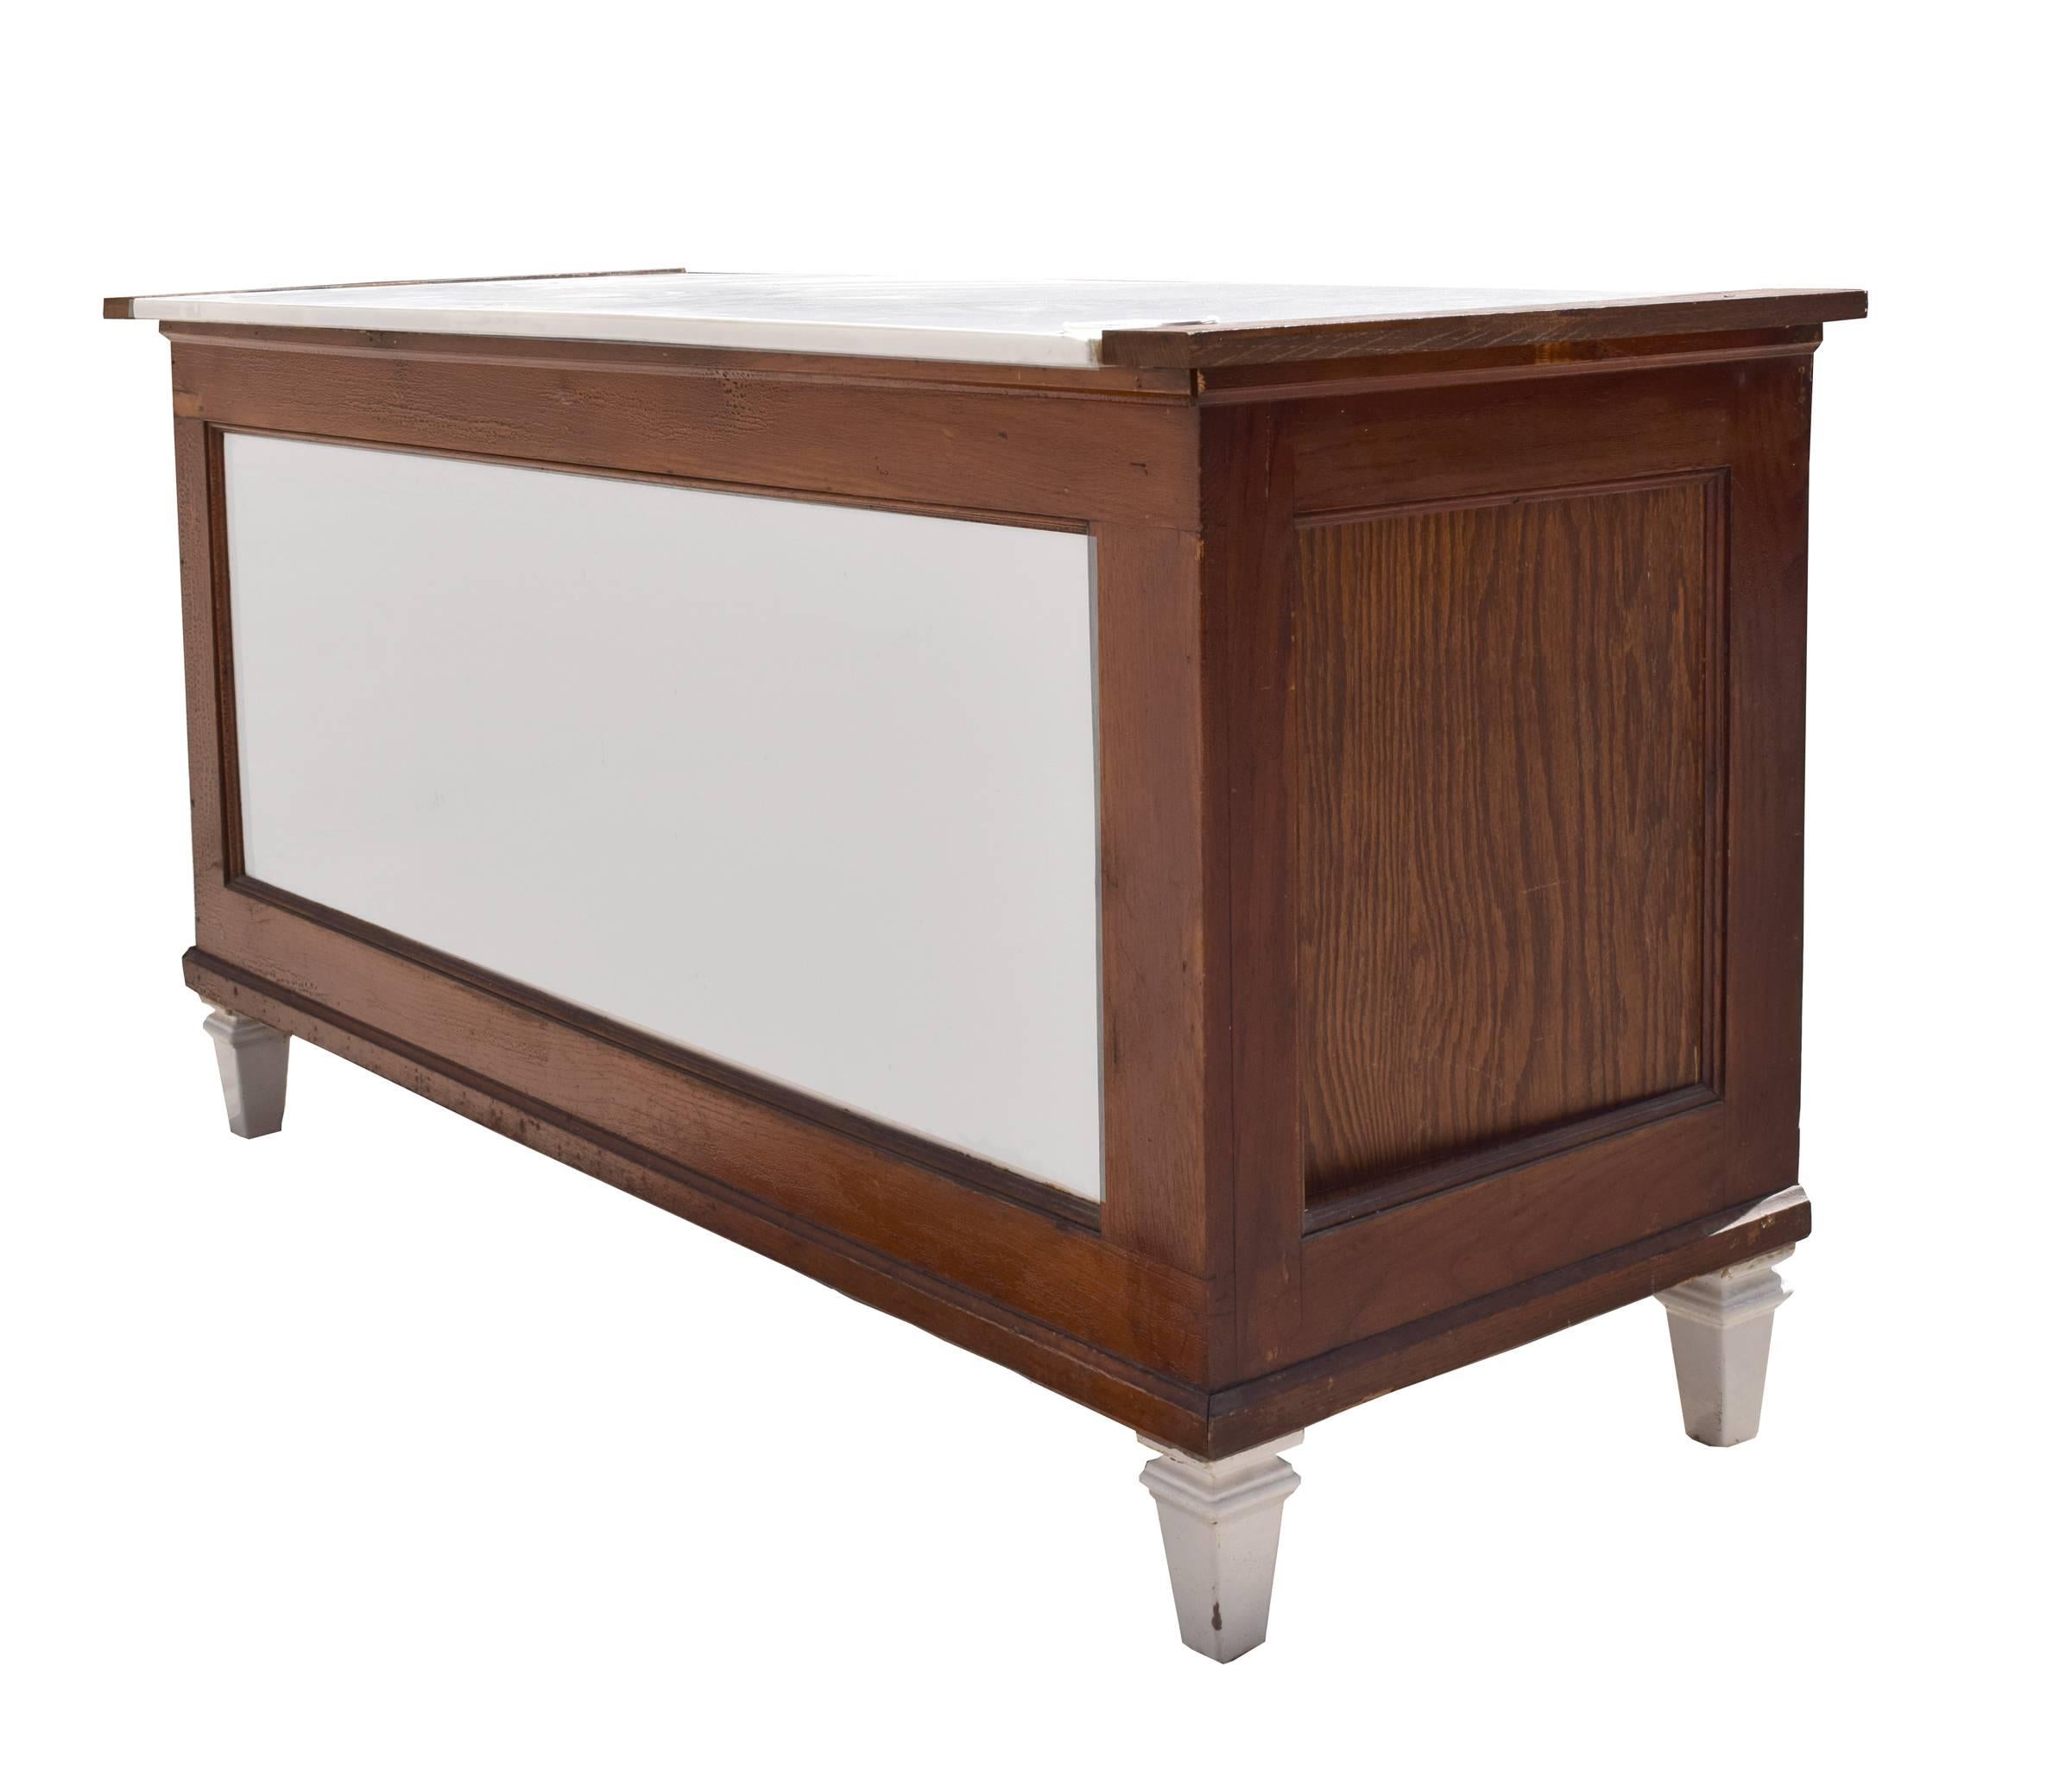 Early 20th century American wood counter with vitreous marble top and front panel, resting on four porcelain over iron legs.